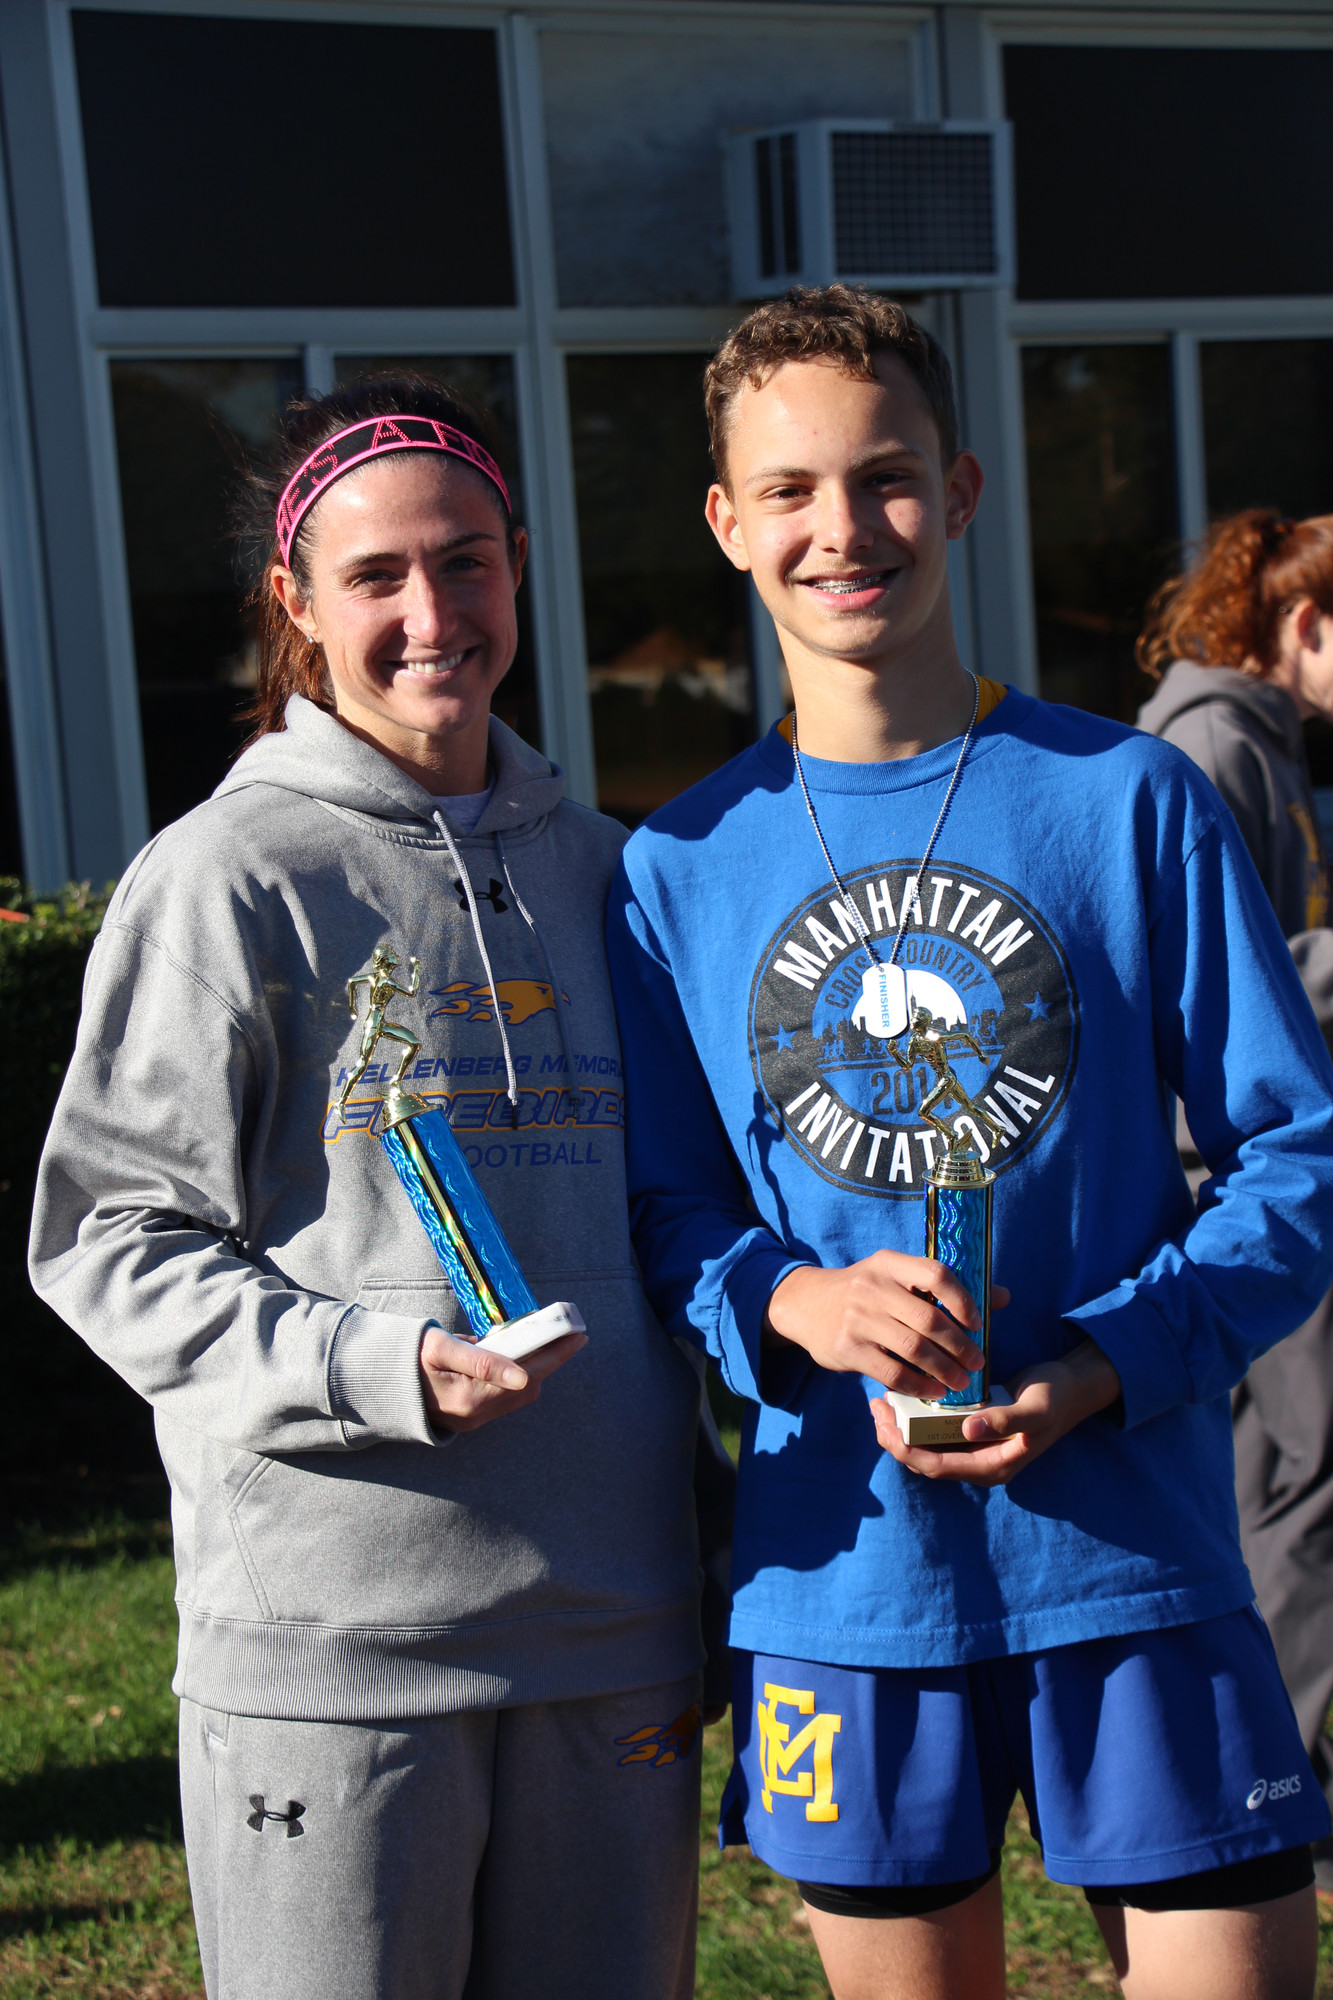 Kelly Perno-Grosser and Matt Erman were the top female and male finishers of the 5K.